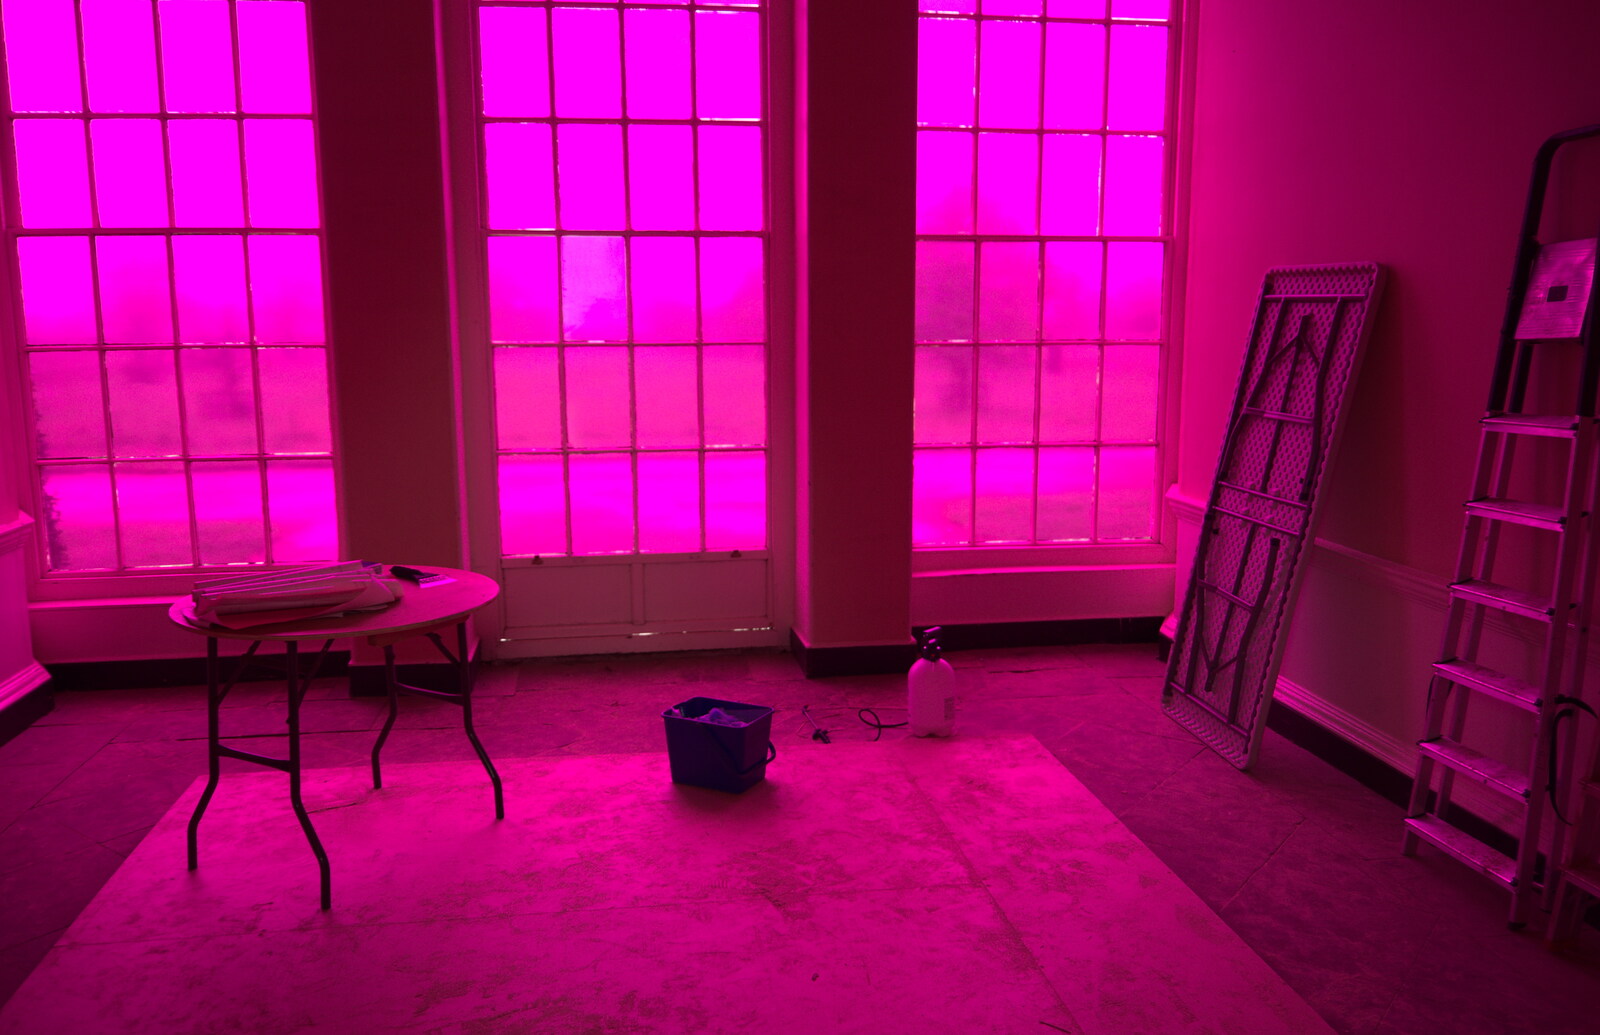 A pink room, thanks to plastic on the windows from A Trip to Blickling Hall, Aylsham, Norfolk - 29th April 2018